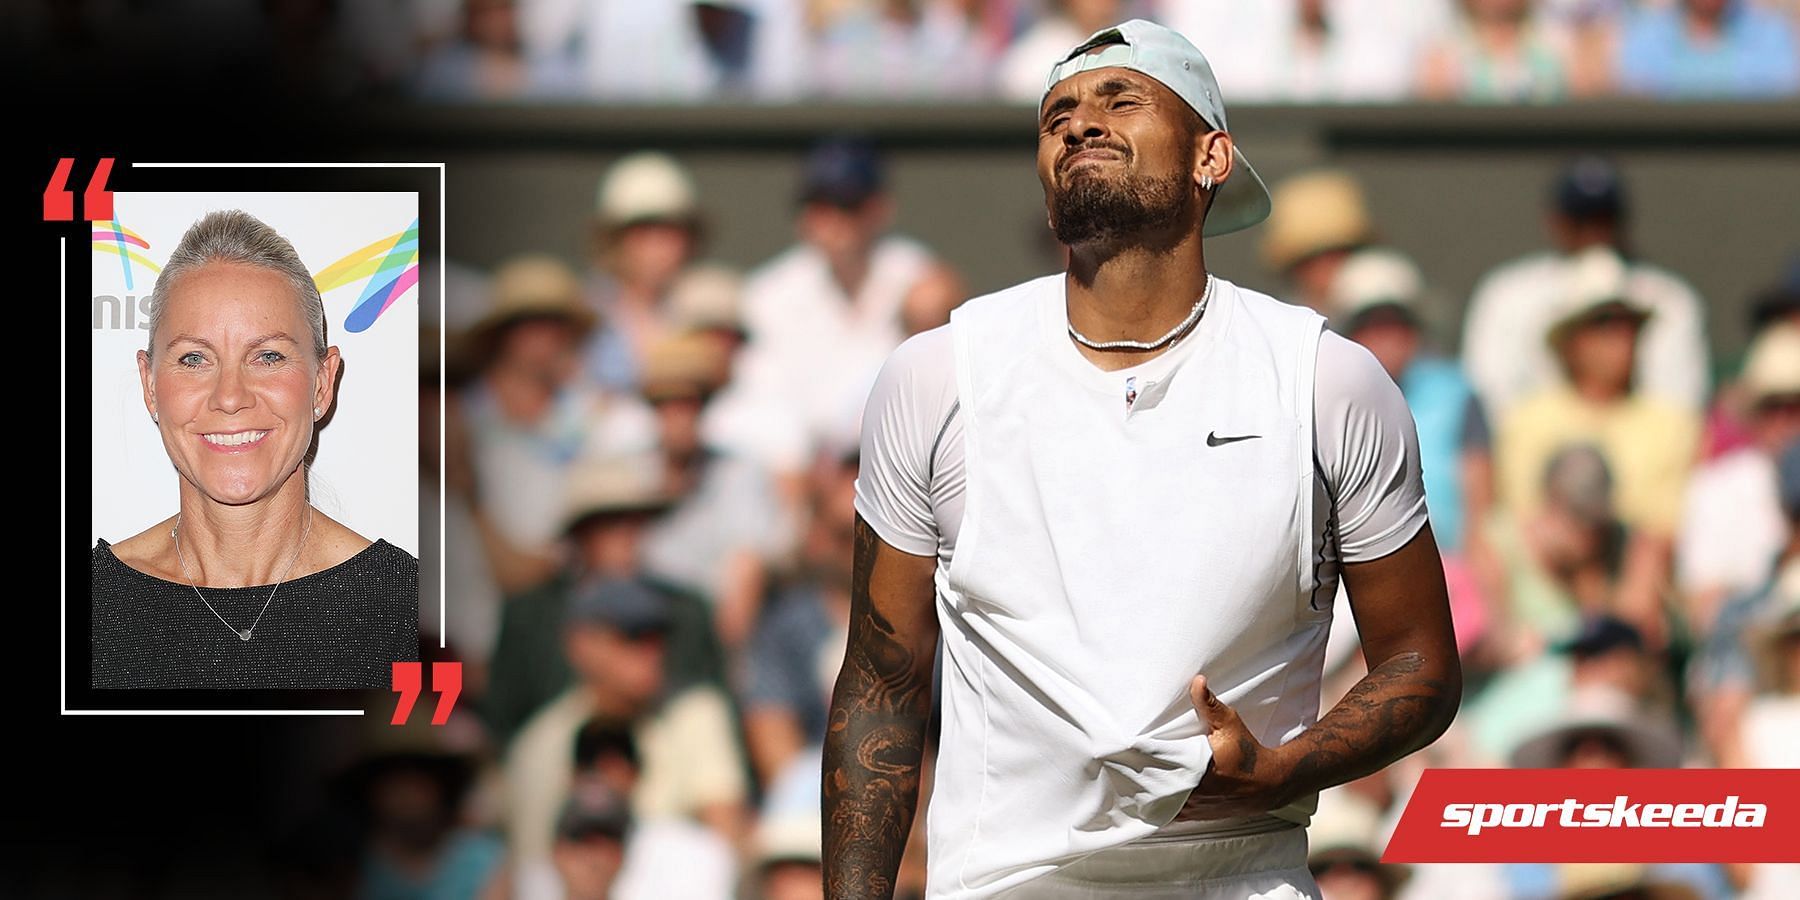 Rennae Stubbs OLY criticizes Nick Kyrgios for his behavior in the final